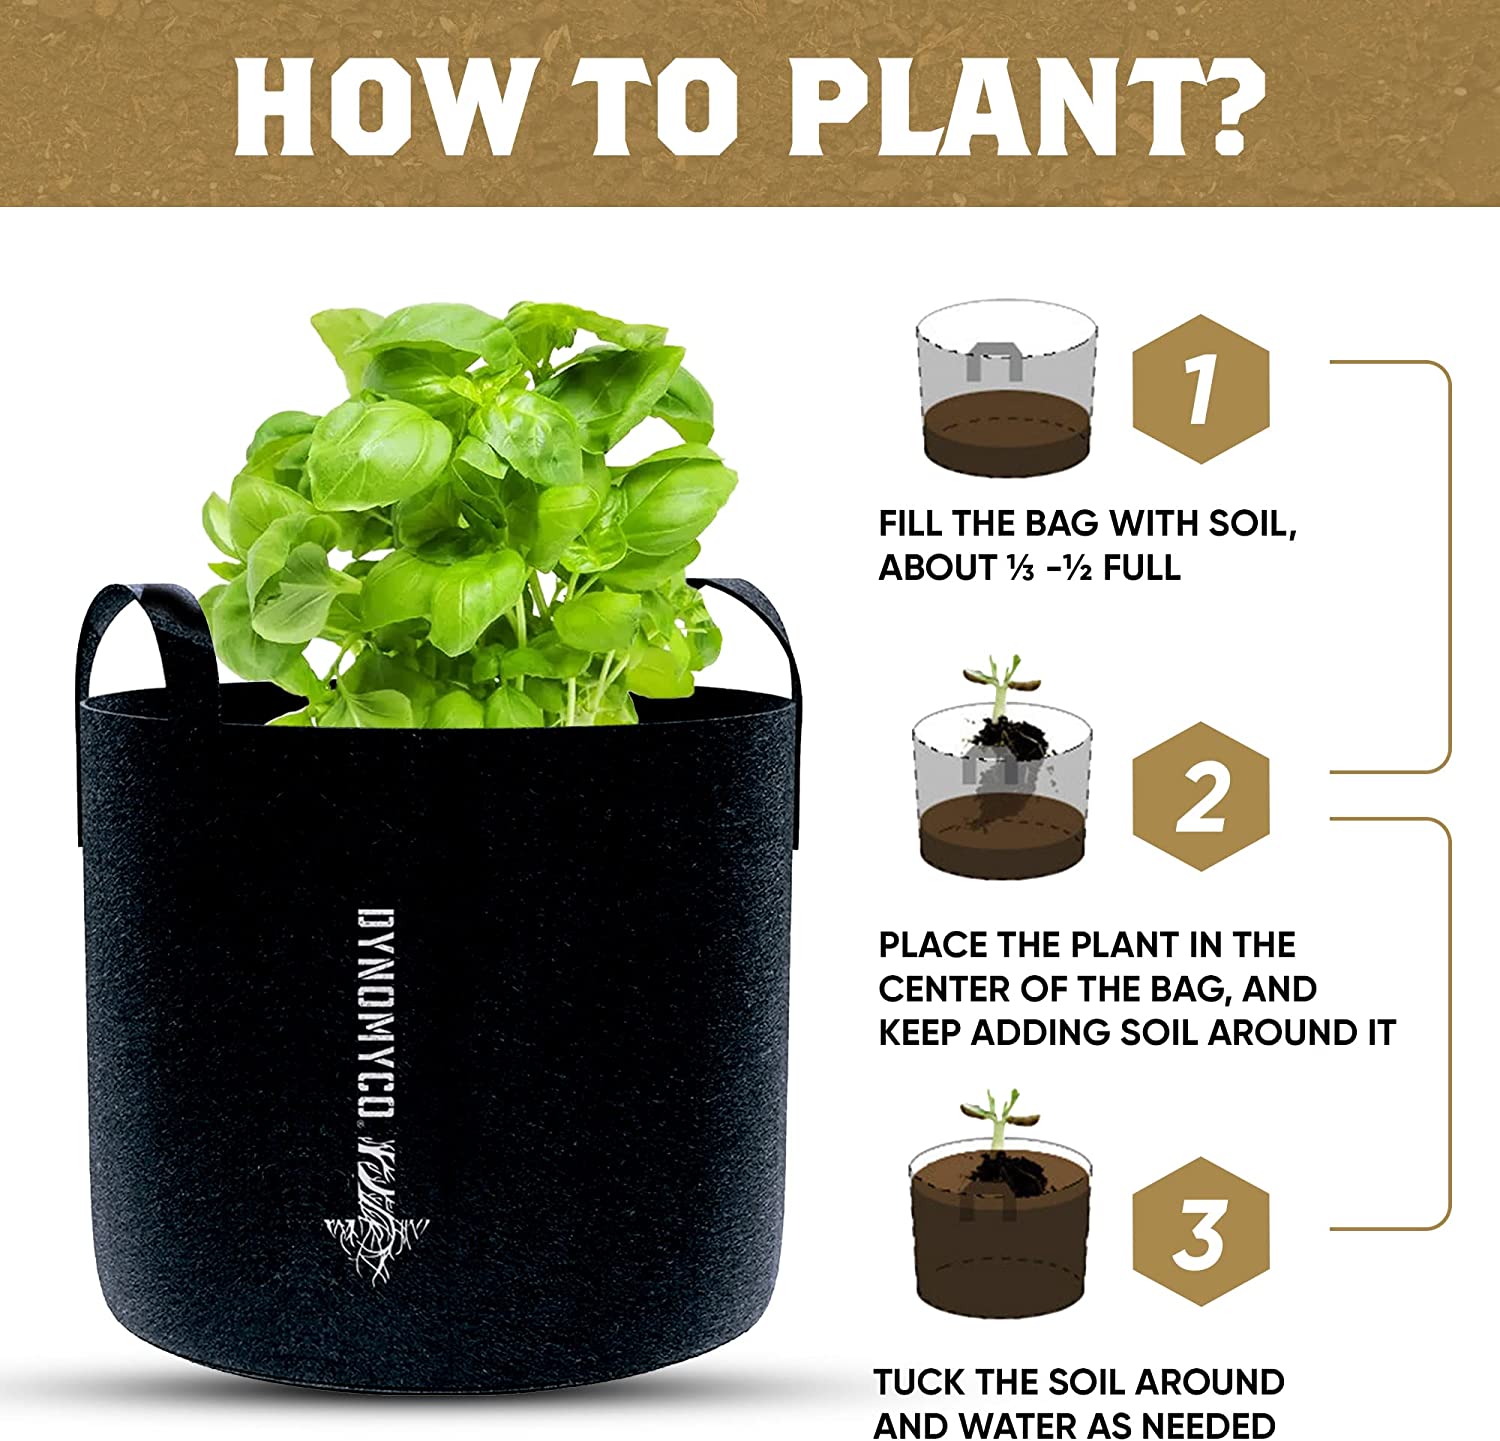 How to Use Growing Bags for Plants: Step-by-Step Guide